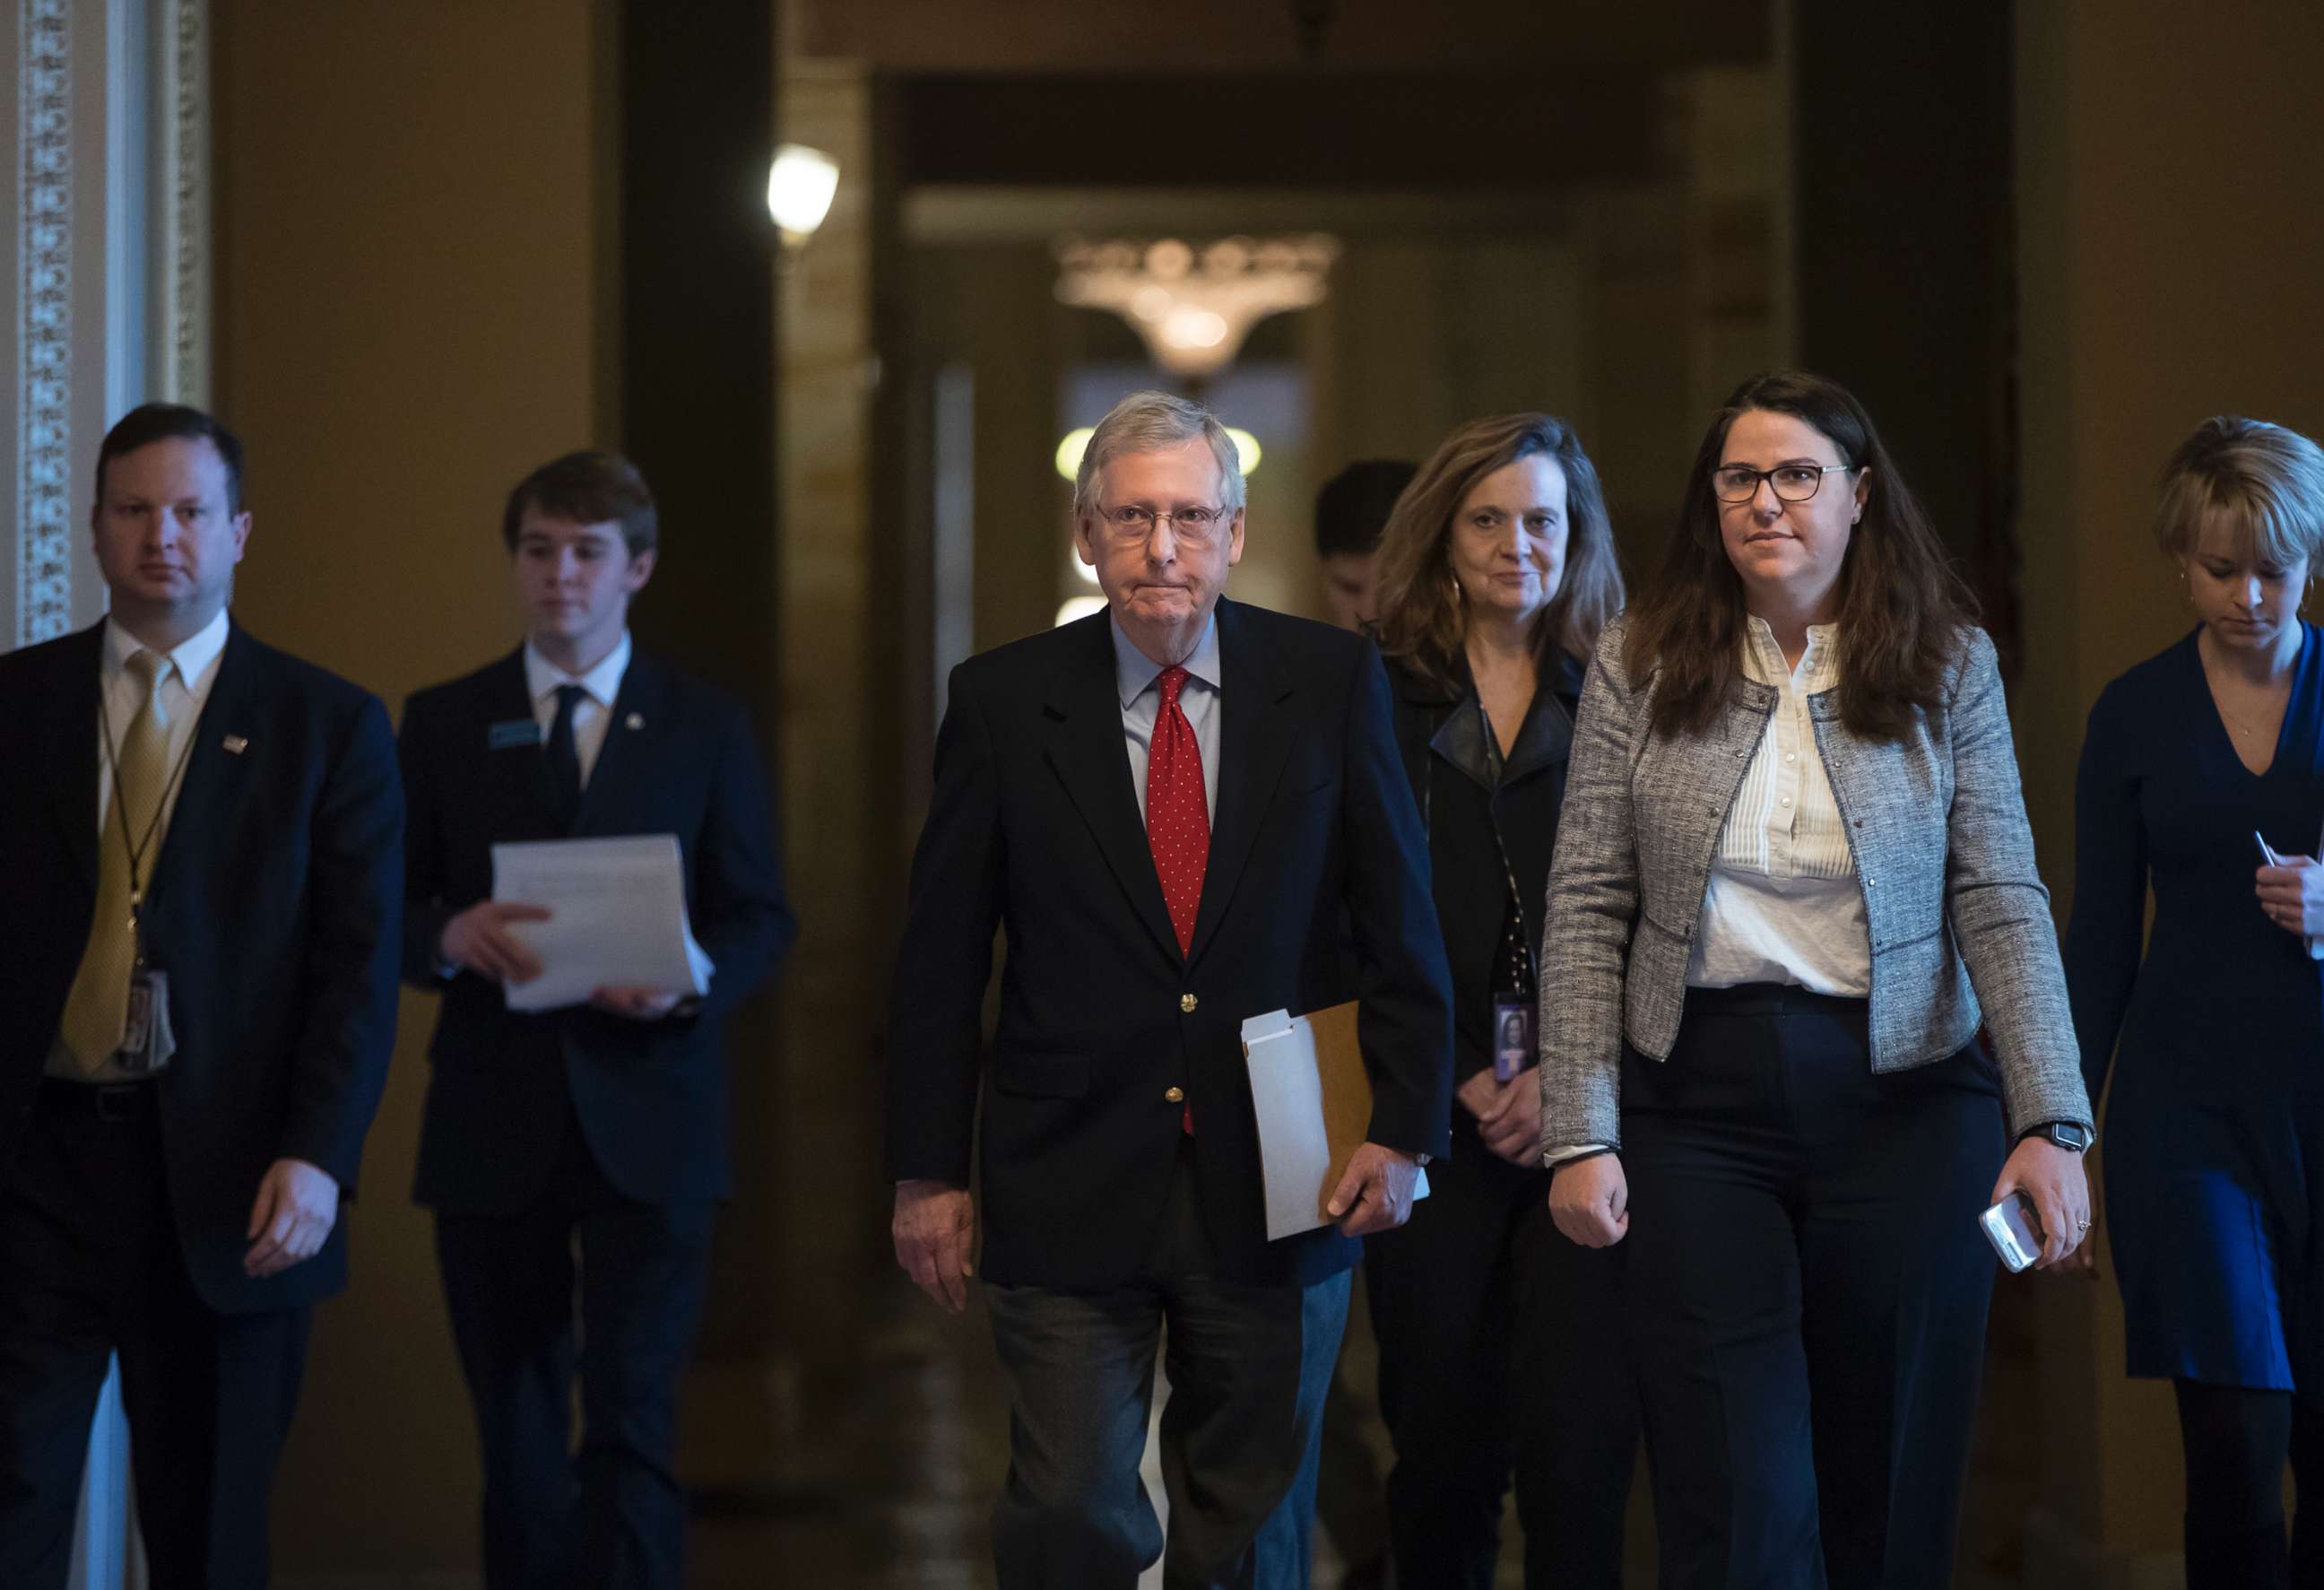 PHOTO: Senate Majority Leader Mitch McConnell walks to the chamber on the first morning of a government shutdown after a divided Senate rejected a funding measure last night, at the Capitol in Washington, D.C., Jan. 20, 2018.